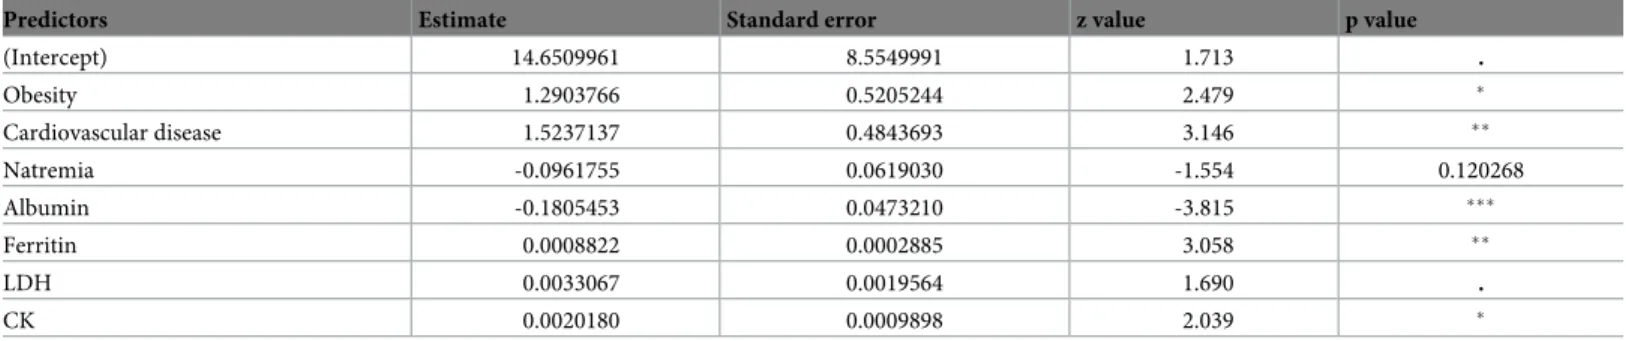 Table 2. Results of the stepwise model selection by Akaike Information Criterion (AIC) for model prediction of COVID-19 severity.